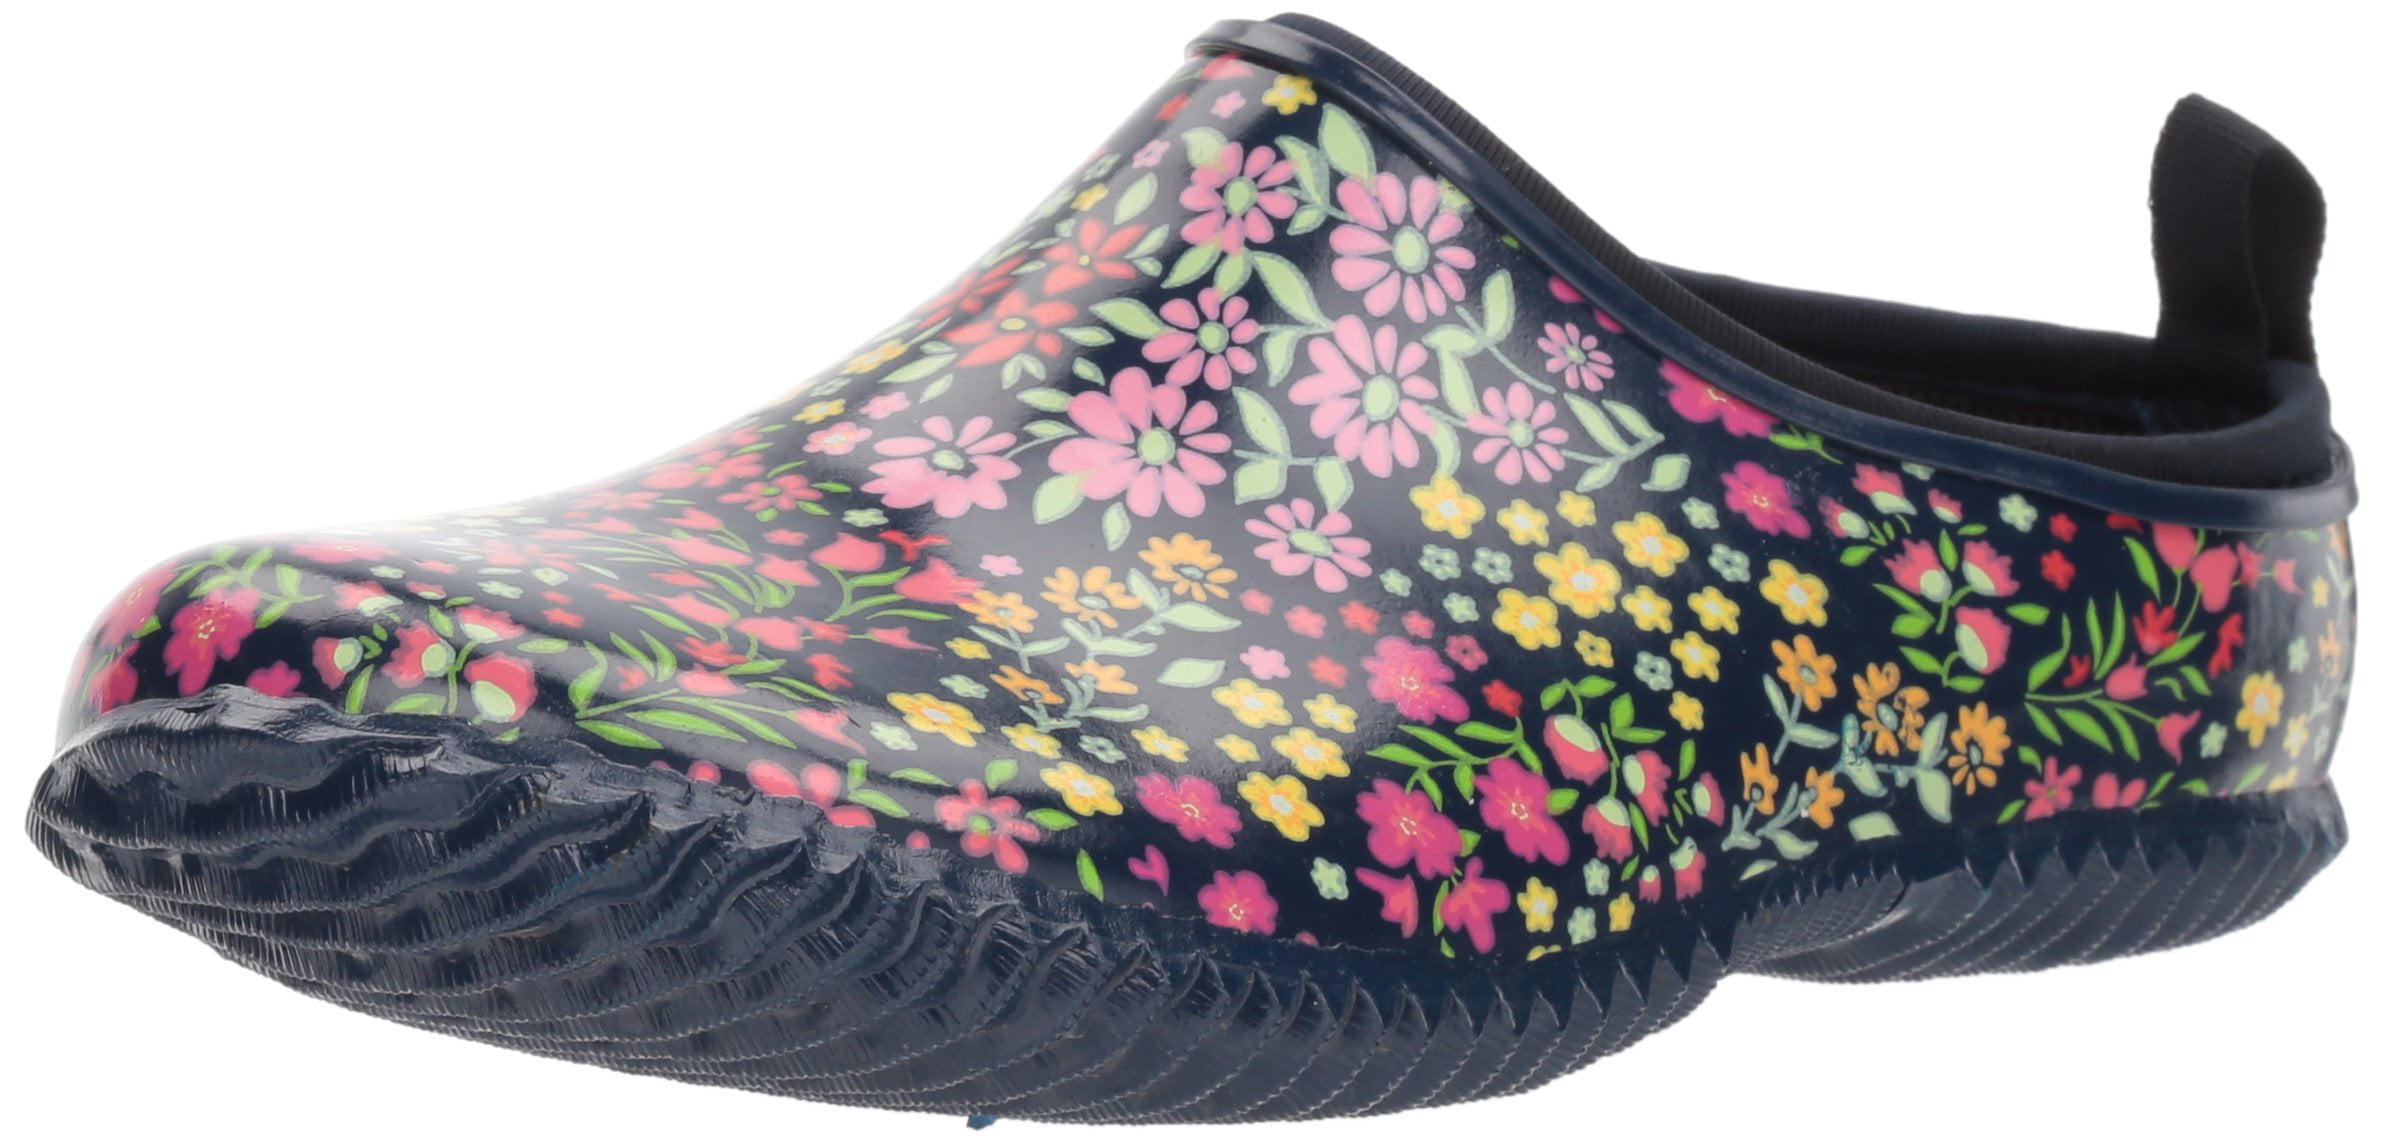 NEW Western Chief Blooming Garden Women's Classic Clog Rain Shoes PICK SIZE 